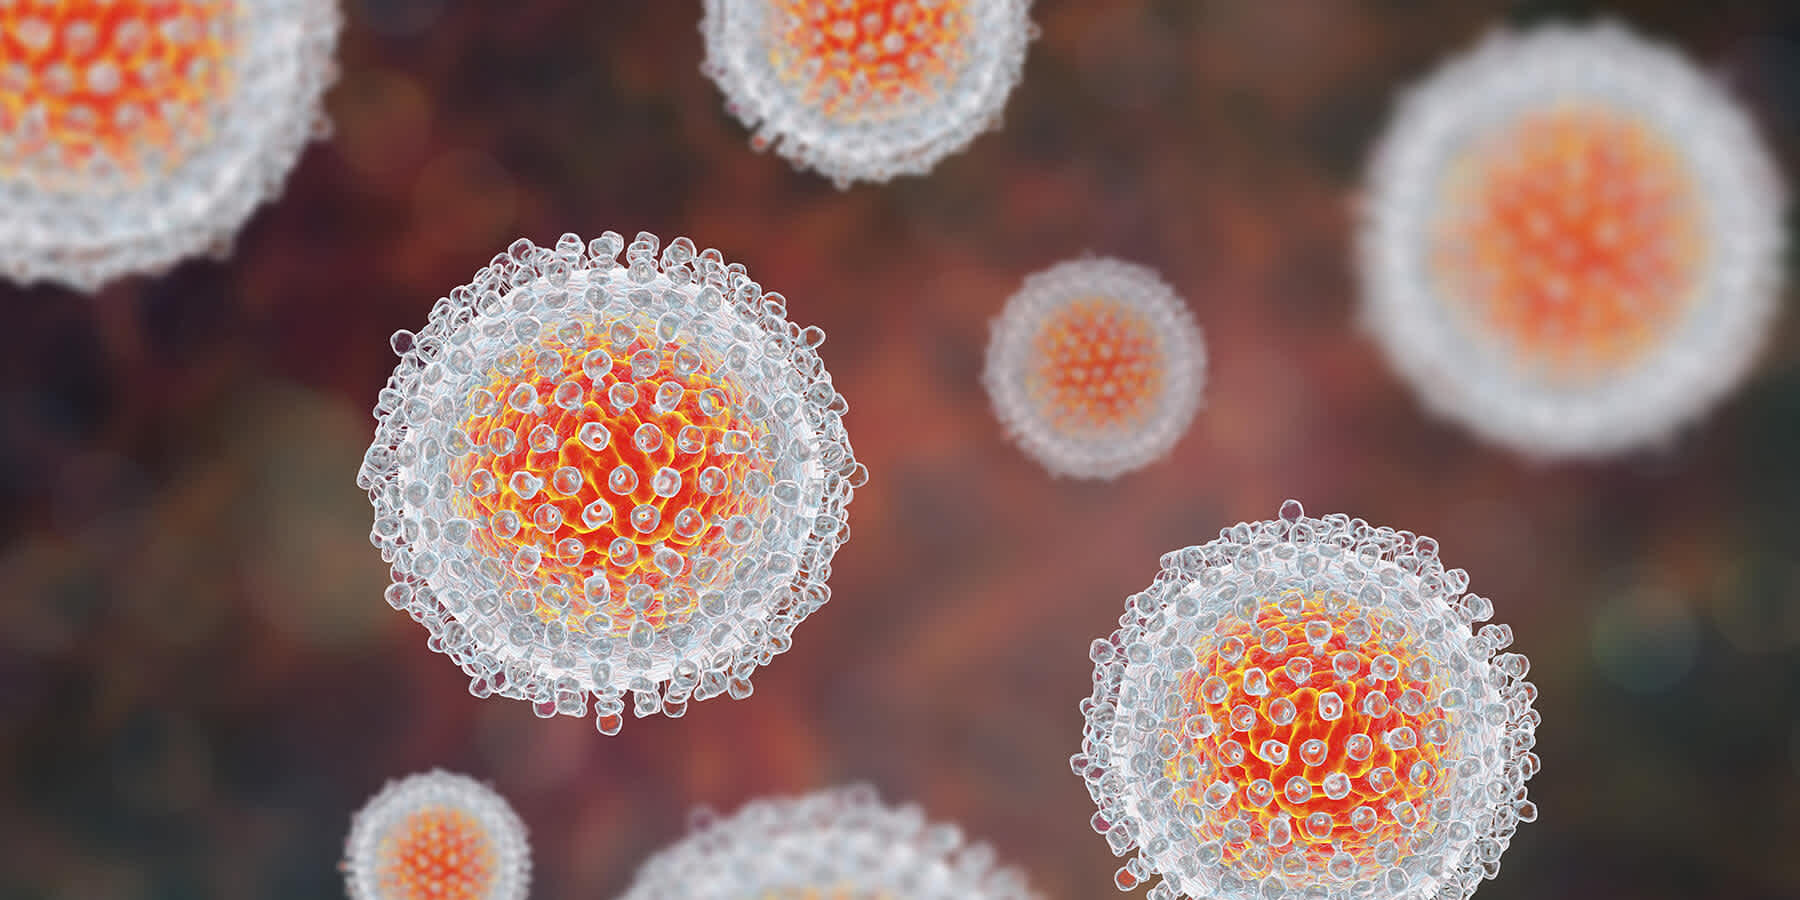 Illustration of genital herpes virus particles transmit without being sexually active